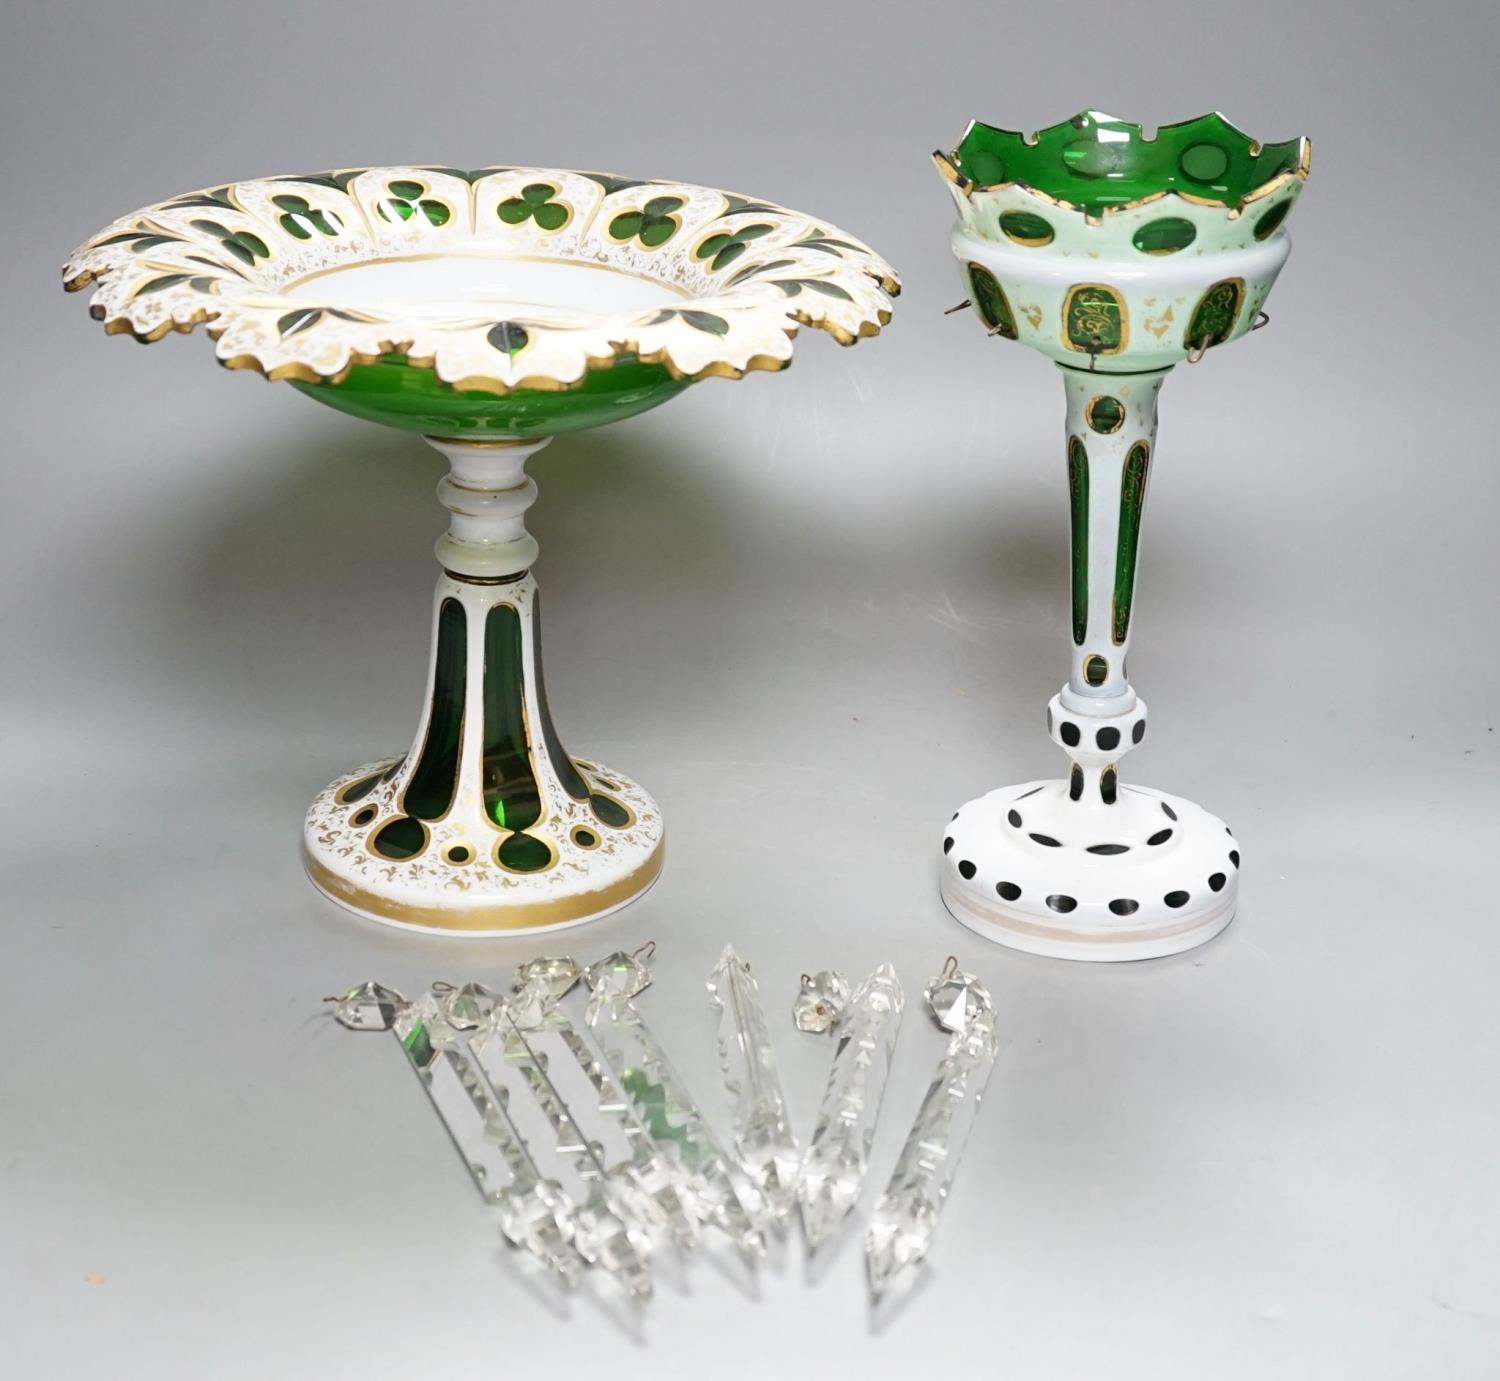 A 19th century overlaid green glass comport, 24cm high, and a similar table lustre